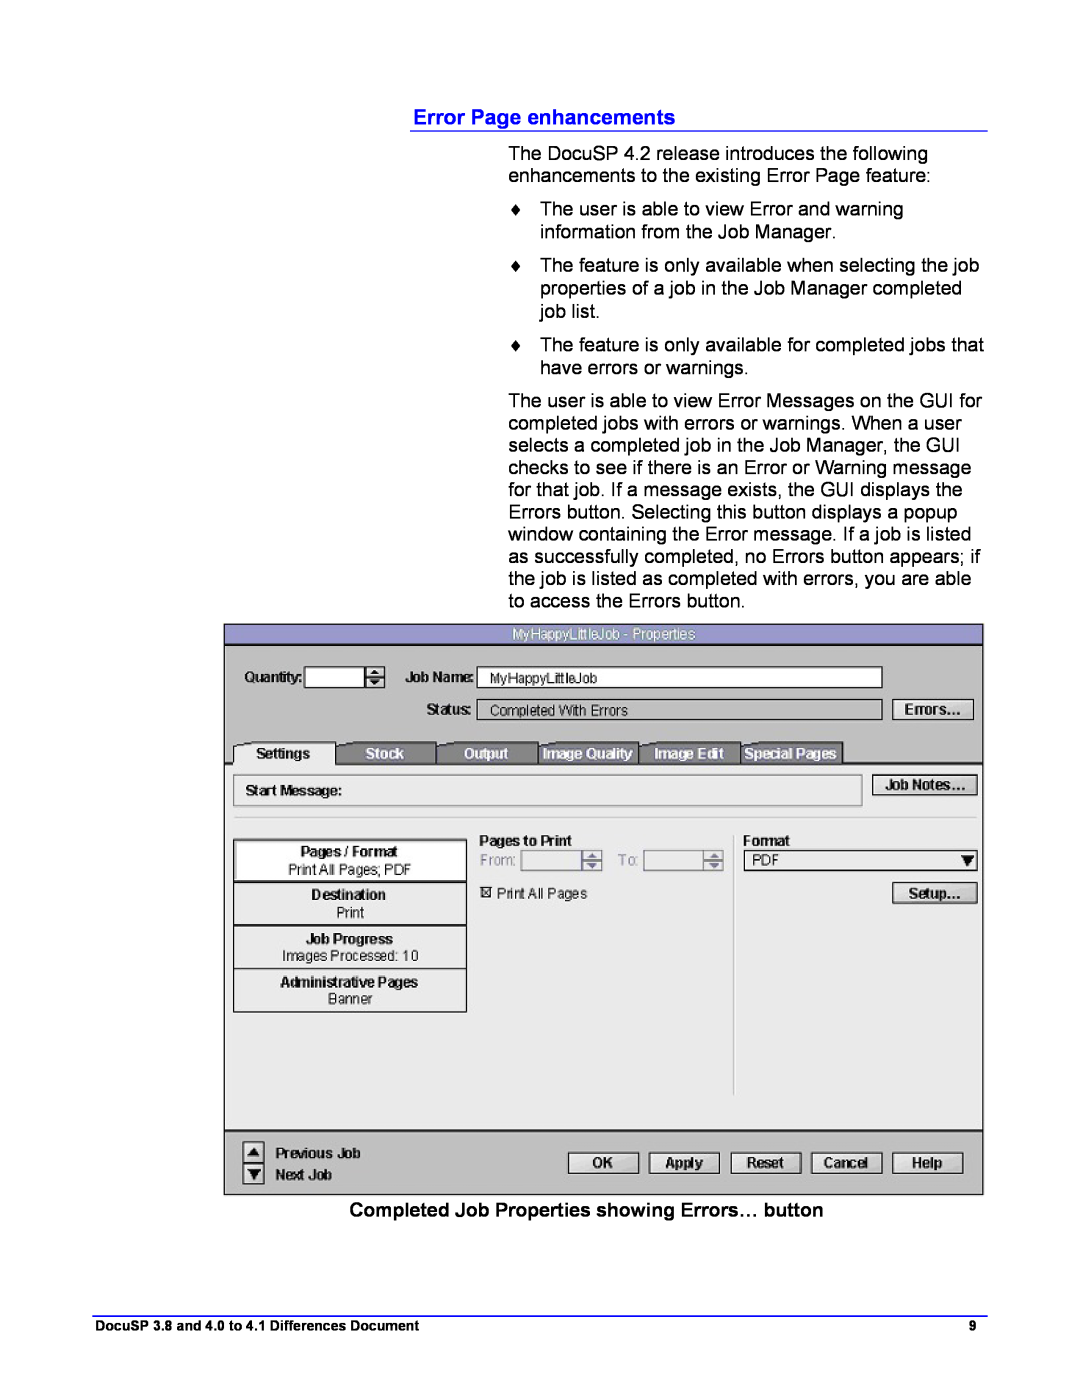 Xerox 4.1, 4.2 manual Error Page enhancements, Completed Job Properties showing Errors… button 